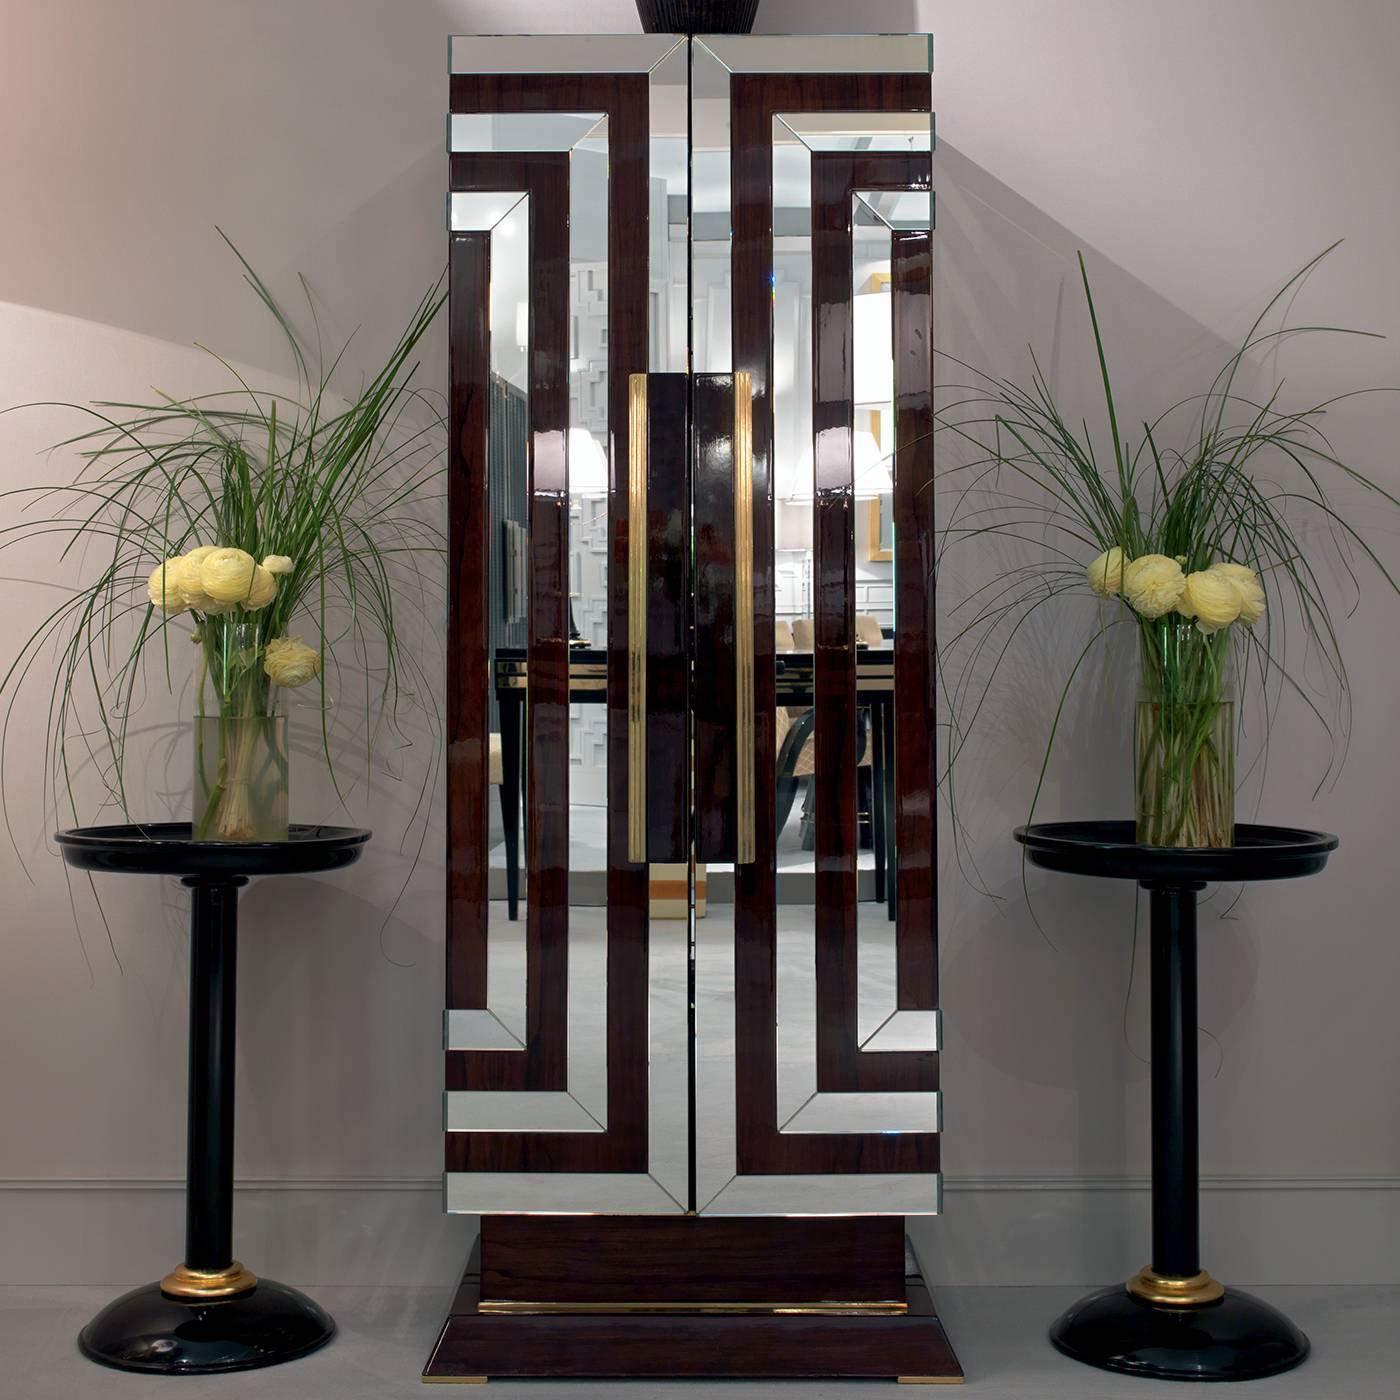 This exquisite bar cabinet is inspired by the bold and sophisticated style of Art Deco with its geometric volumes and decorations, and its polished reflective surfaces. The glossy walnut wood structure is adorned with a series of concentric lines